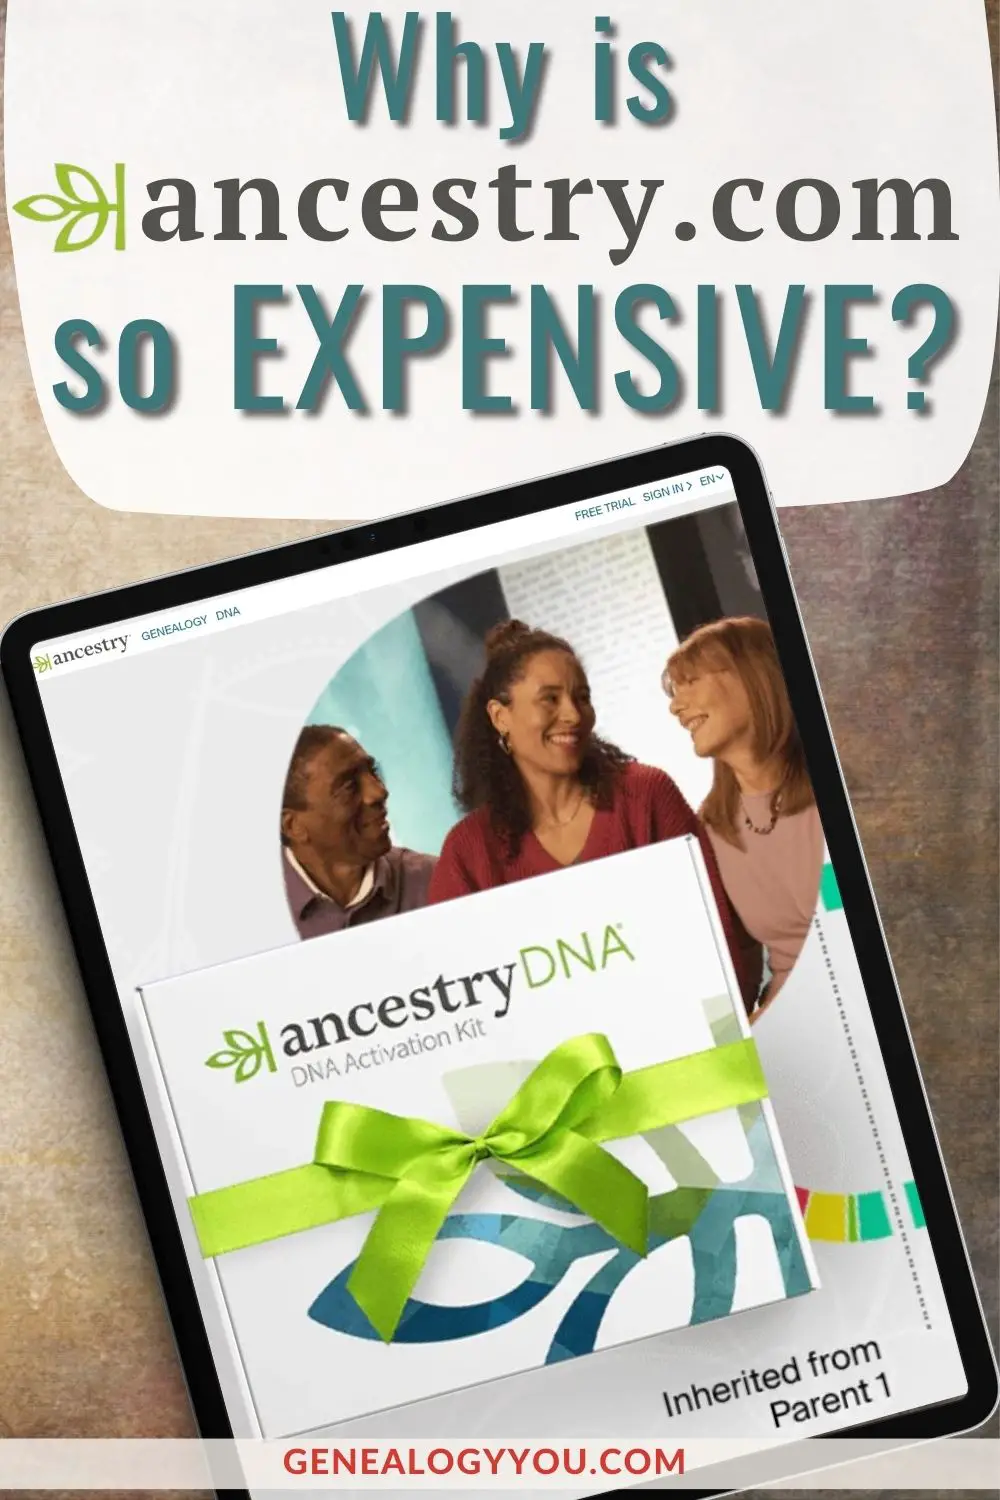 Image showing a mock up tablet with ancestry.com website and text overlay that reads Why Is Ancestry.com So Expensive